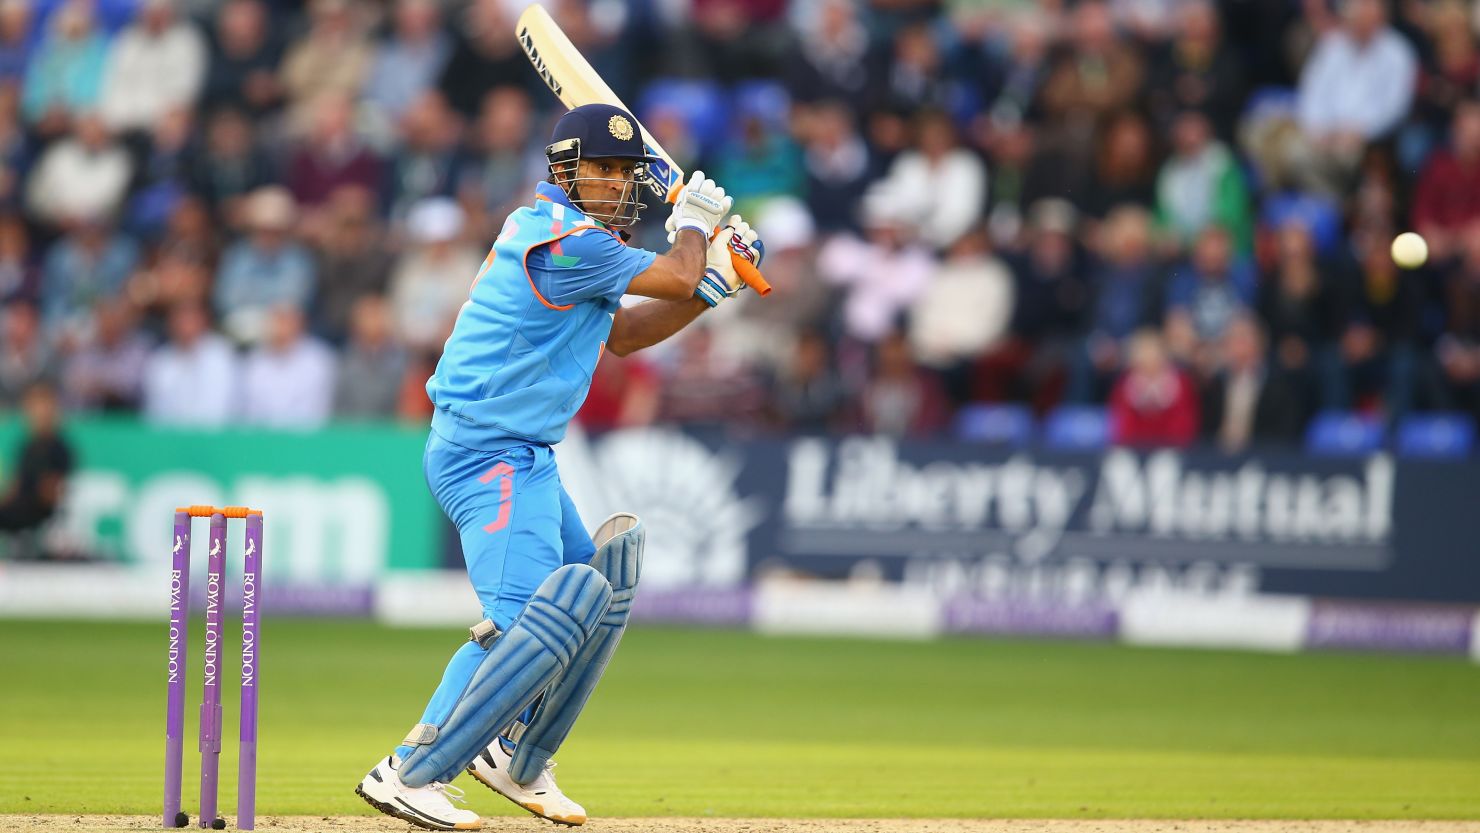 MS Dhoni was the first captain to win cricket's three major limited-overs titles.